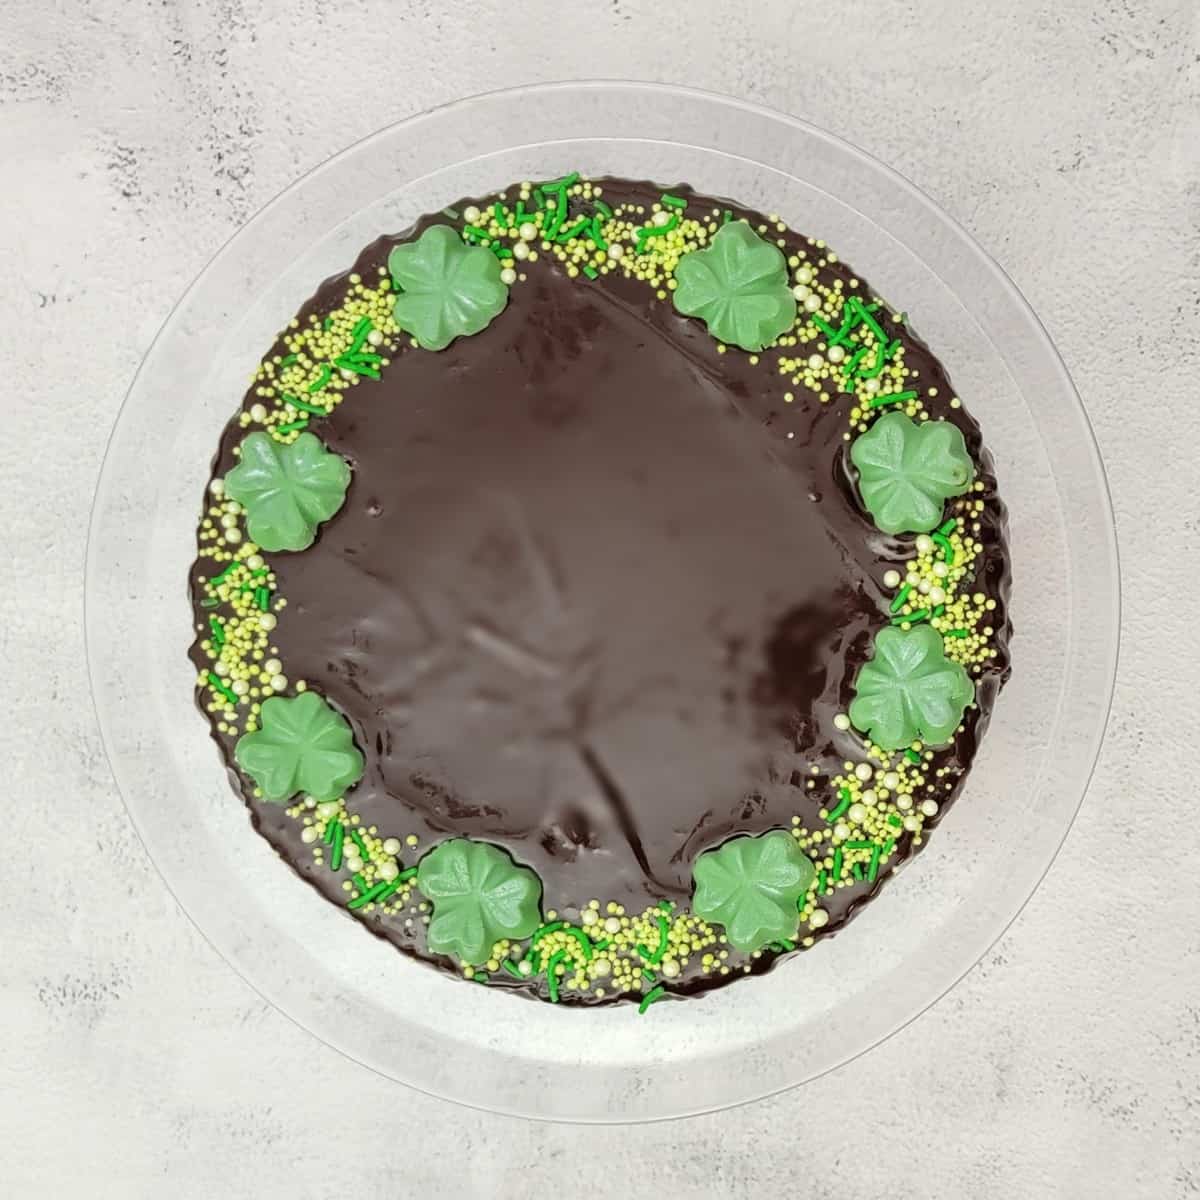 overhead view of St Patrick's Day flourless chocolate cake decorated with green sprinkles and shamrocks